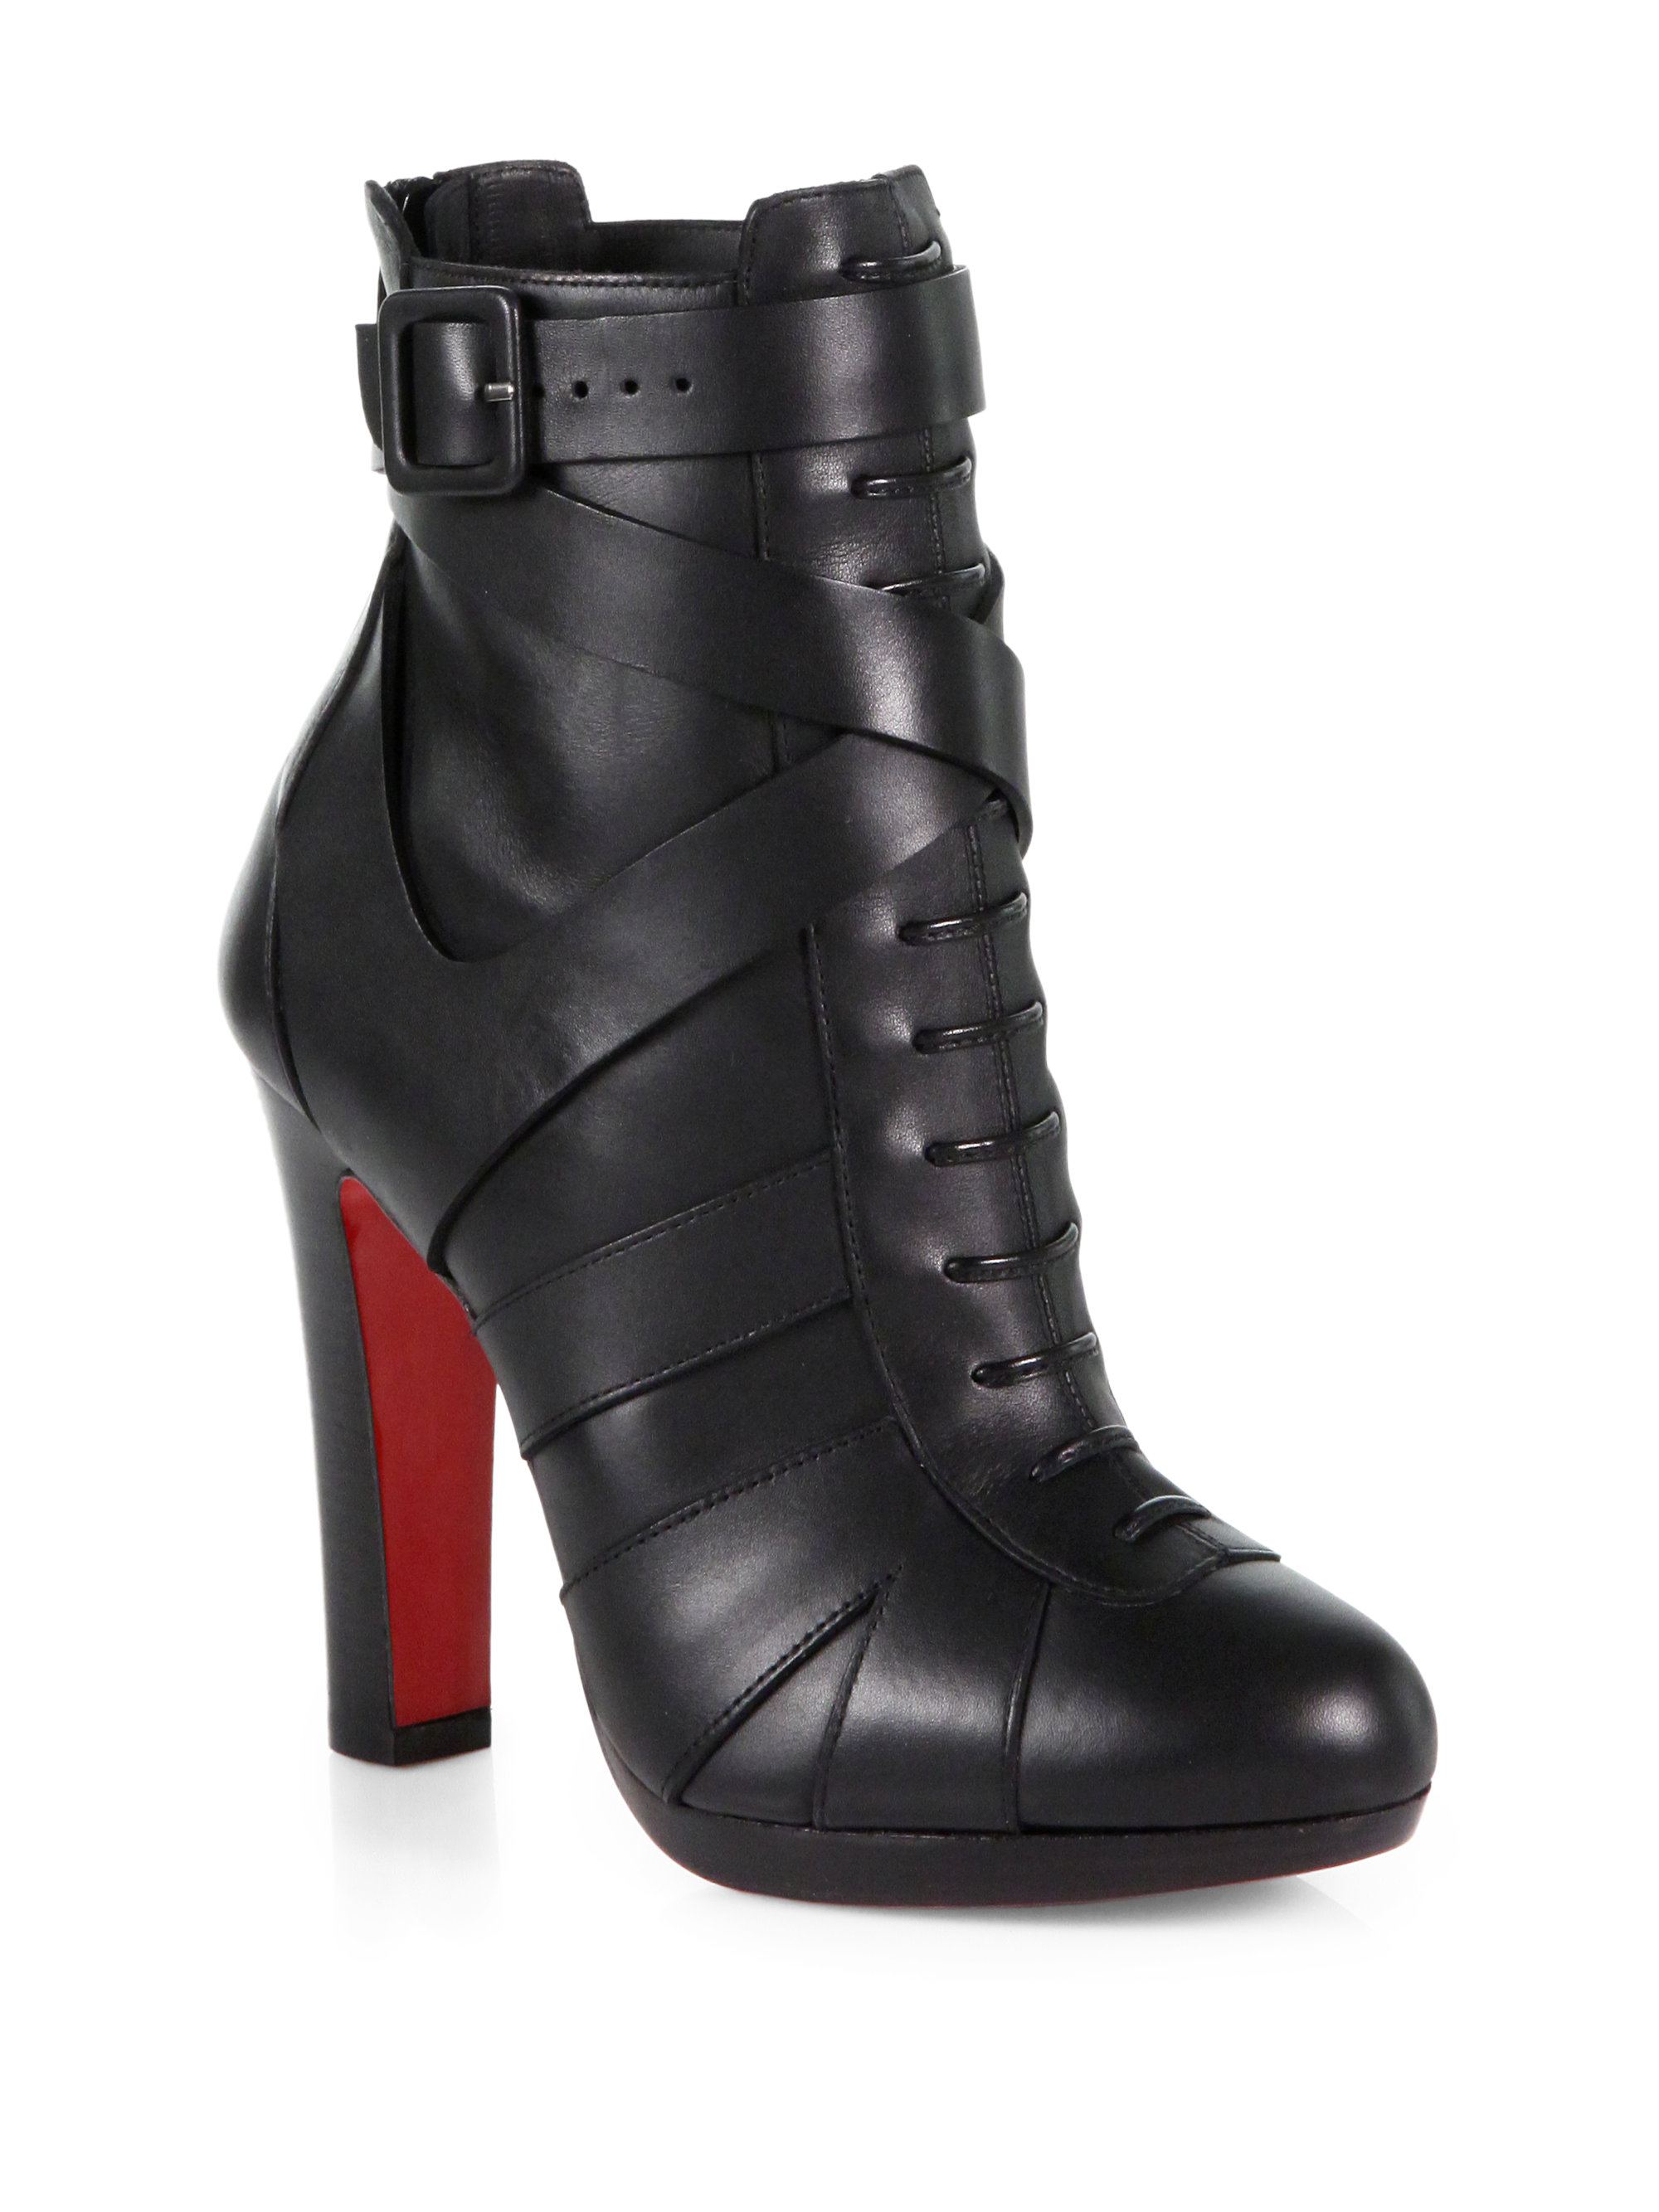 Christian Louboutin Lamu Leather Platform Ankle Boots in Black | Lyst